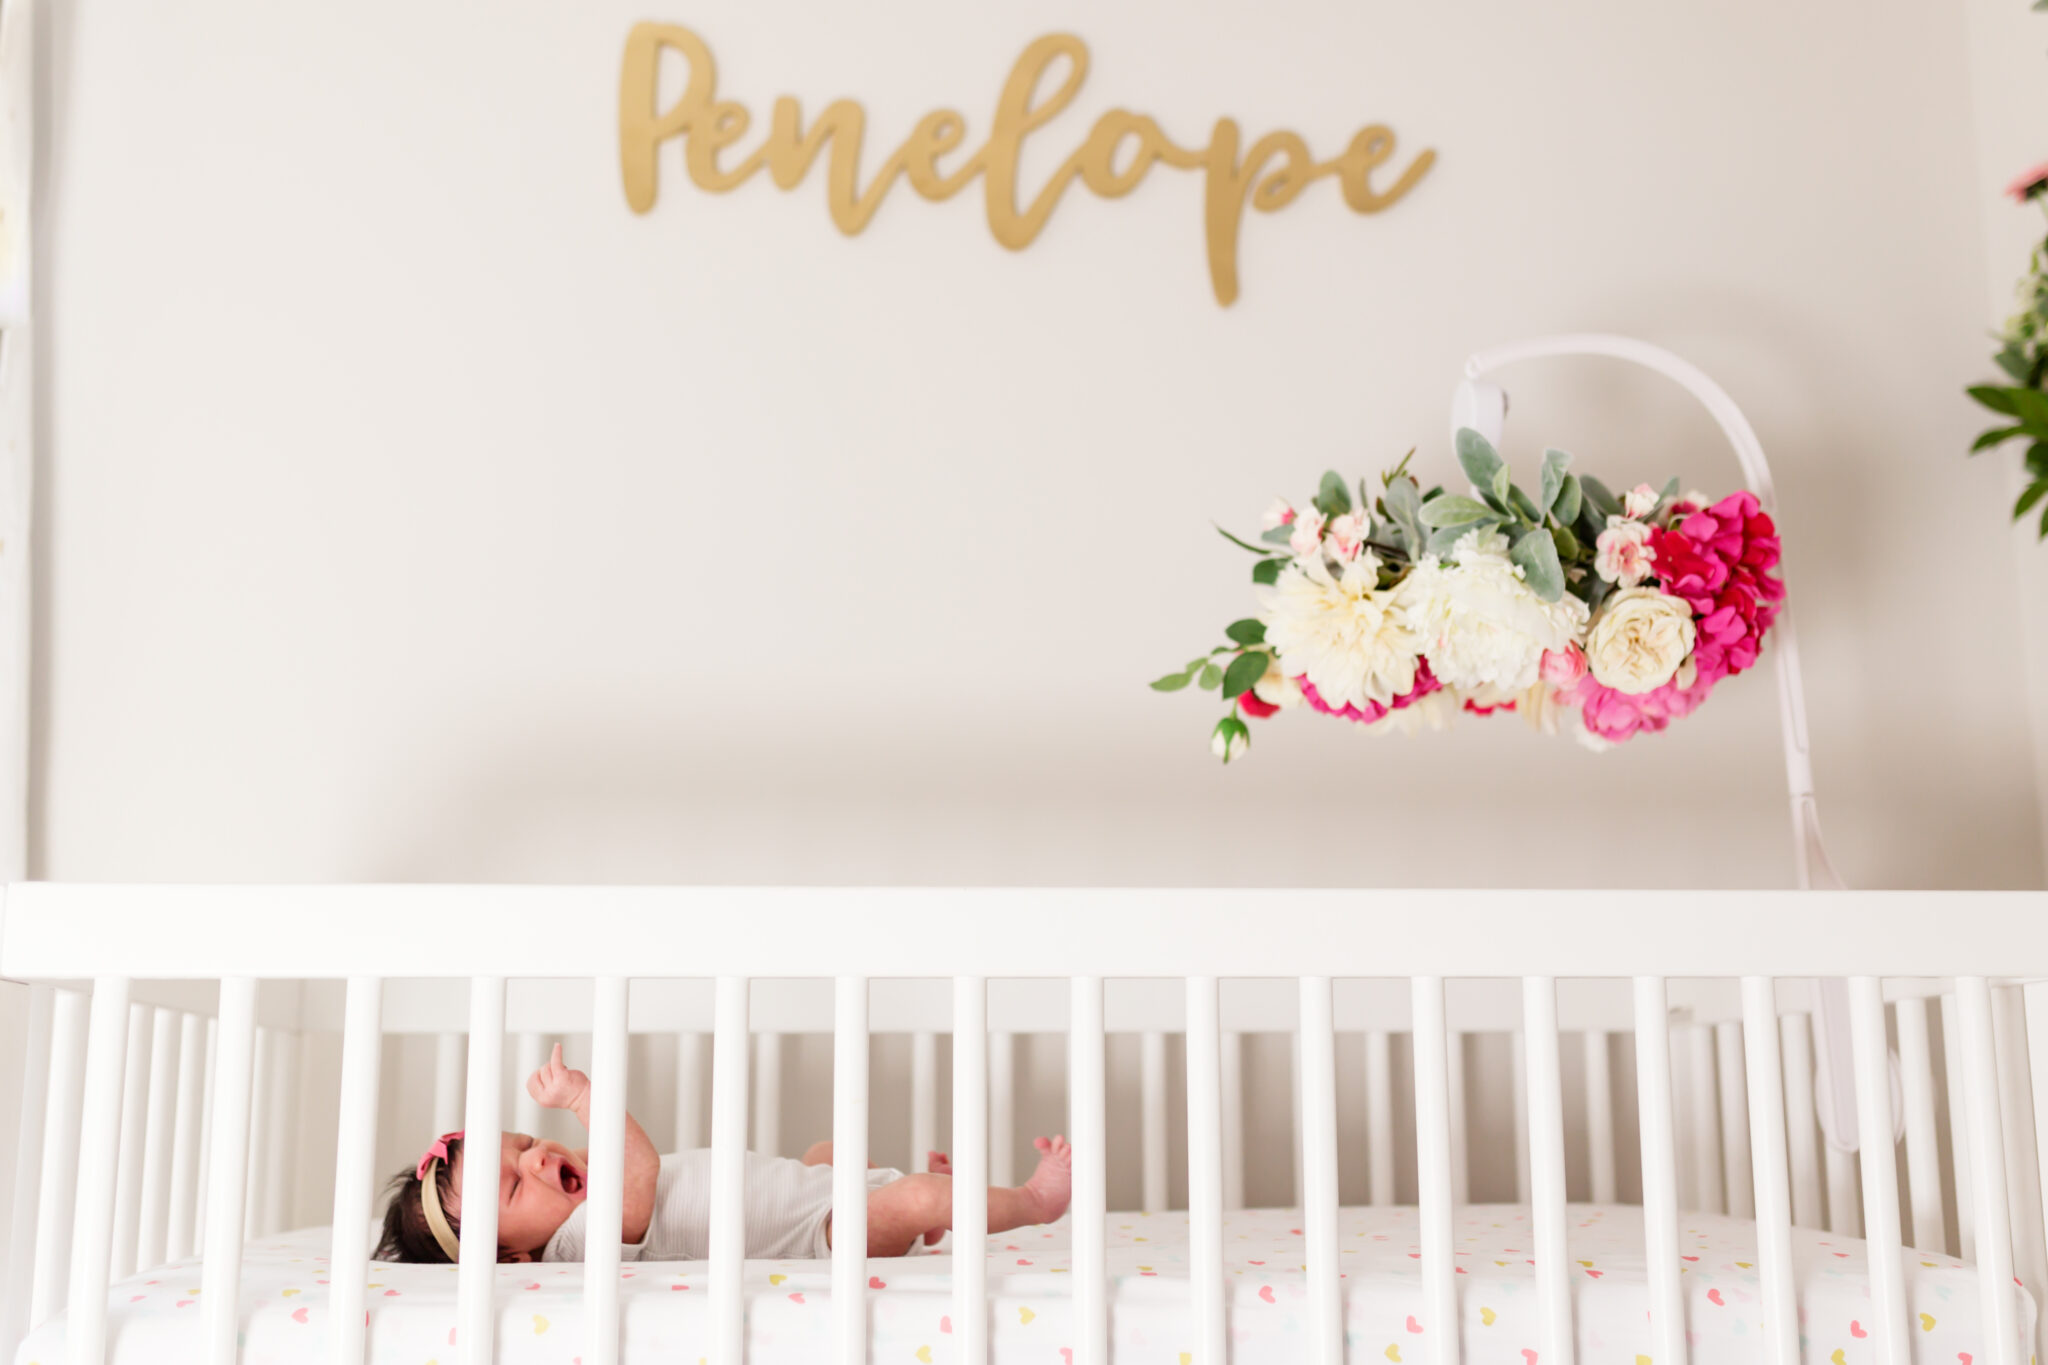 Penelope name out of wood in nursery with floral mobile